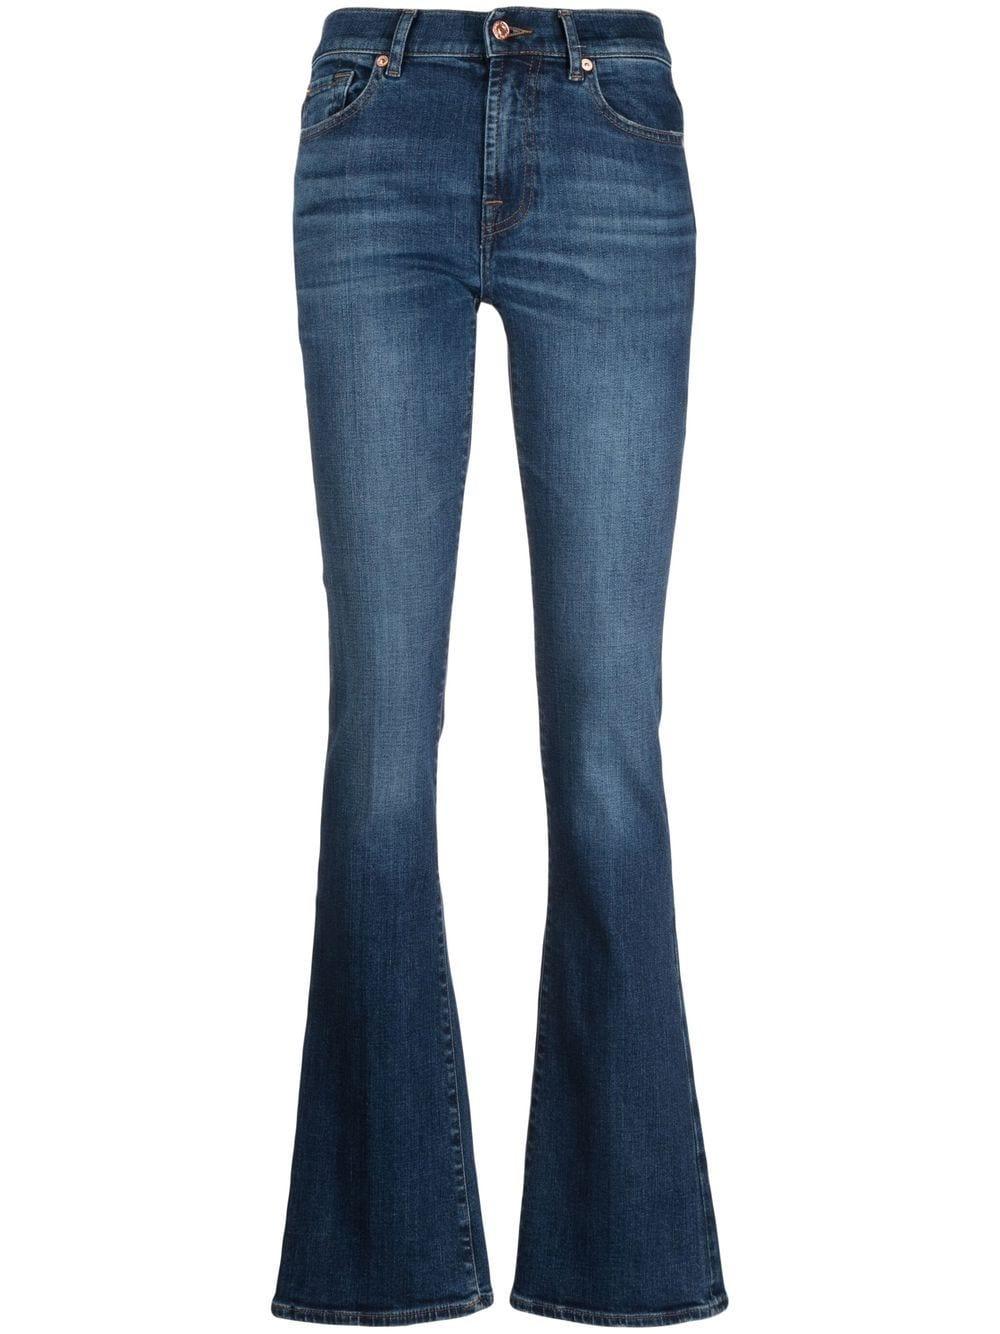 7 For All Mankind Denim Bootcut Slim Illusion Stride in Blue Womens Clothing Jeans Bootcut jeans 